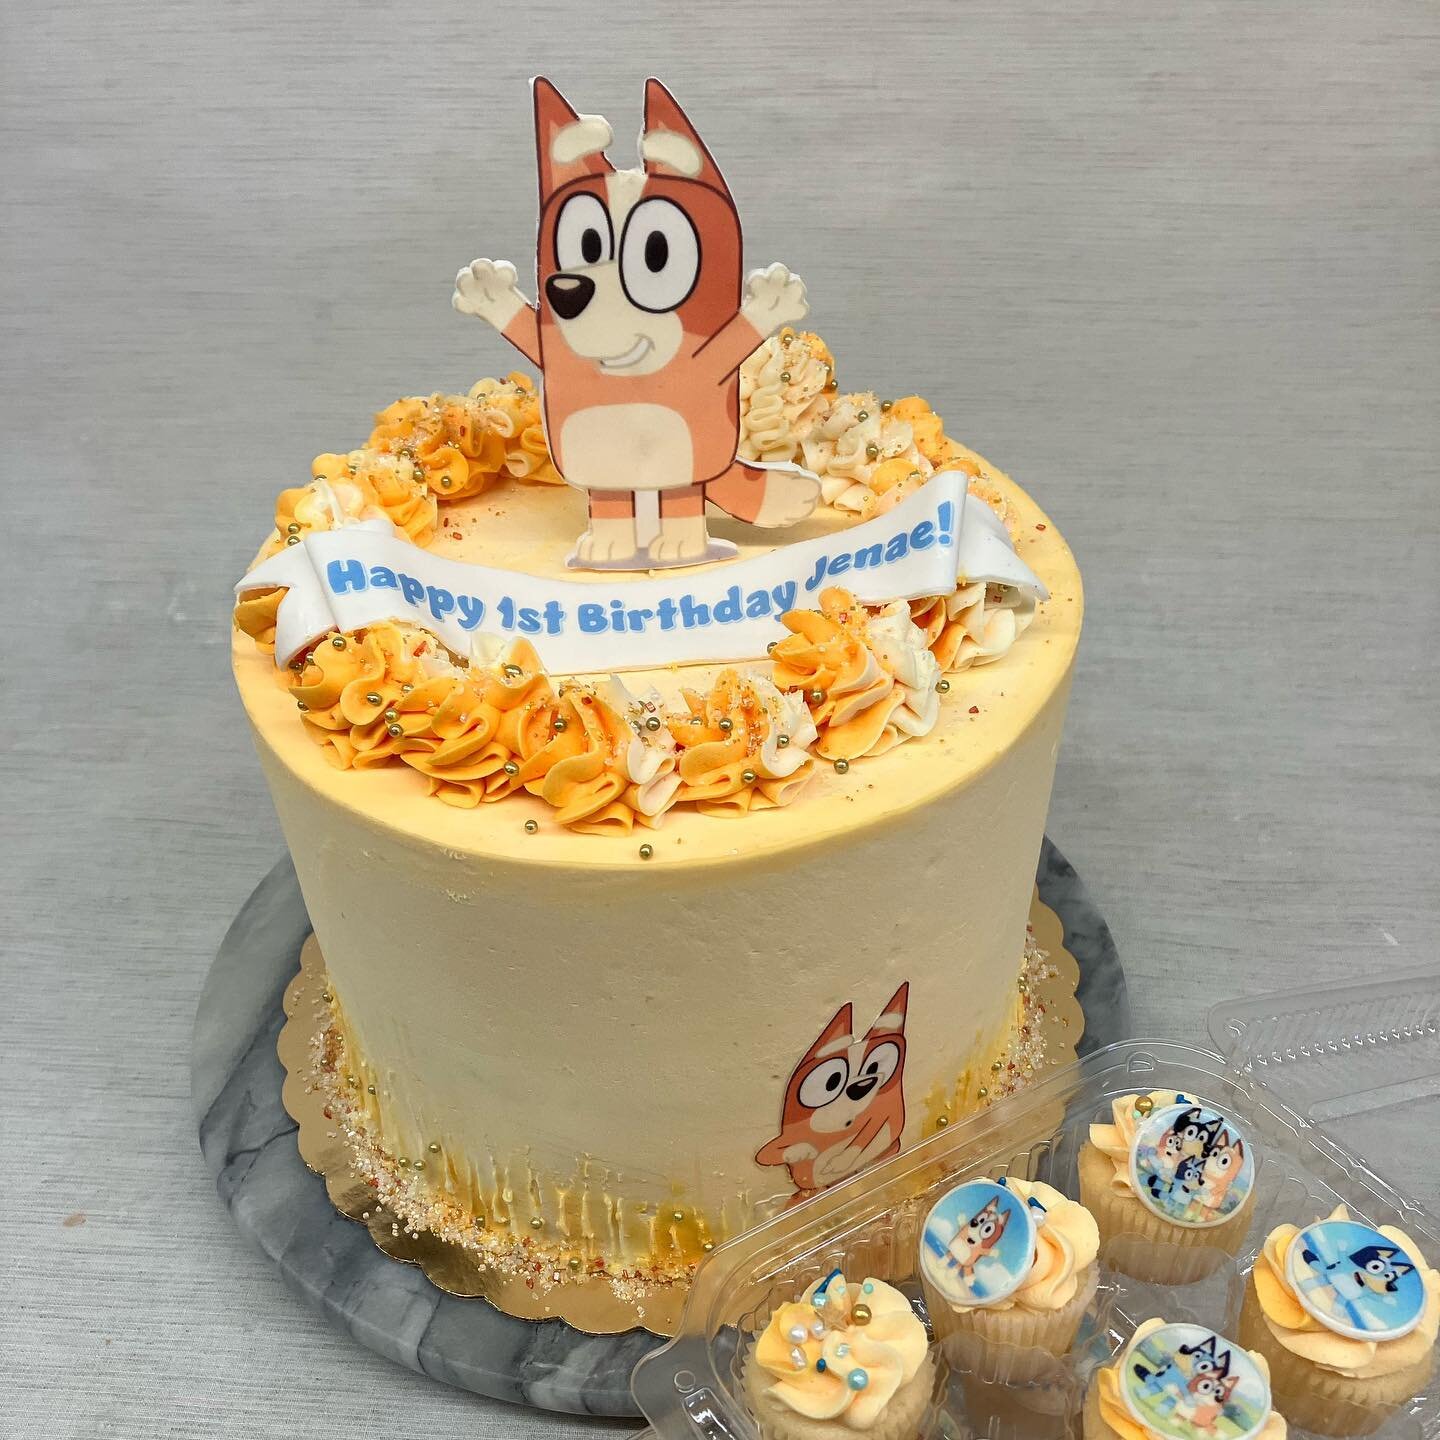 6&rdquo; themed cake with added on two dozen mini cupcakes.

https://www.sweetandshiny.com/shop-landing

Tag someone that needs to know! 
#sweetandshiny 
#shoplocal
#shopnow